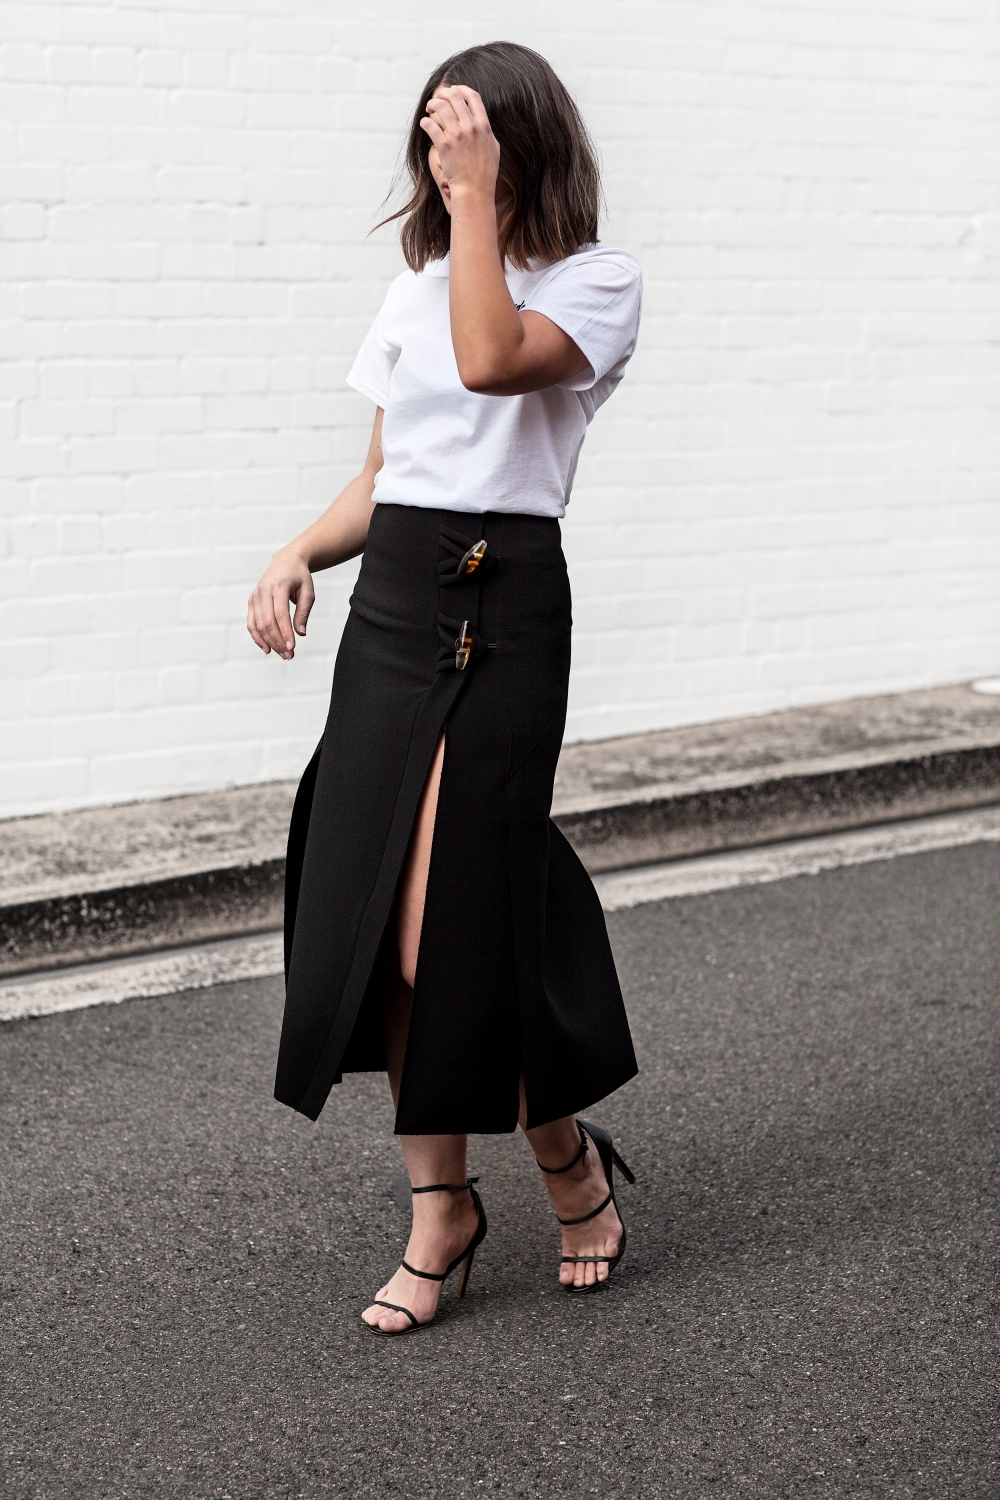 Double Trouble t-shirt and Christopher Esber skirt | The UNDONE online store | Outfit | Style | Streetstyle | HarperandHarley